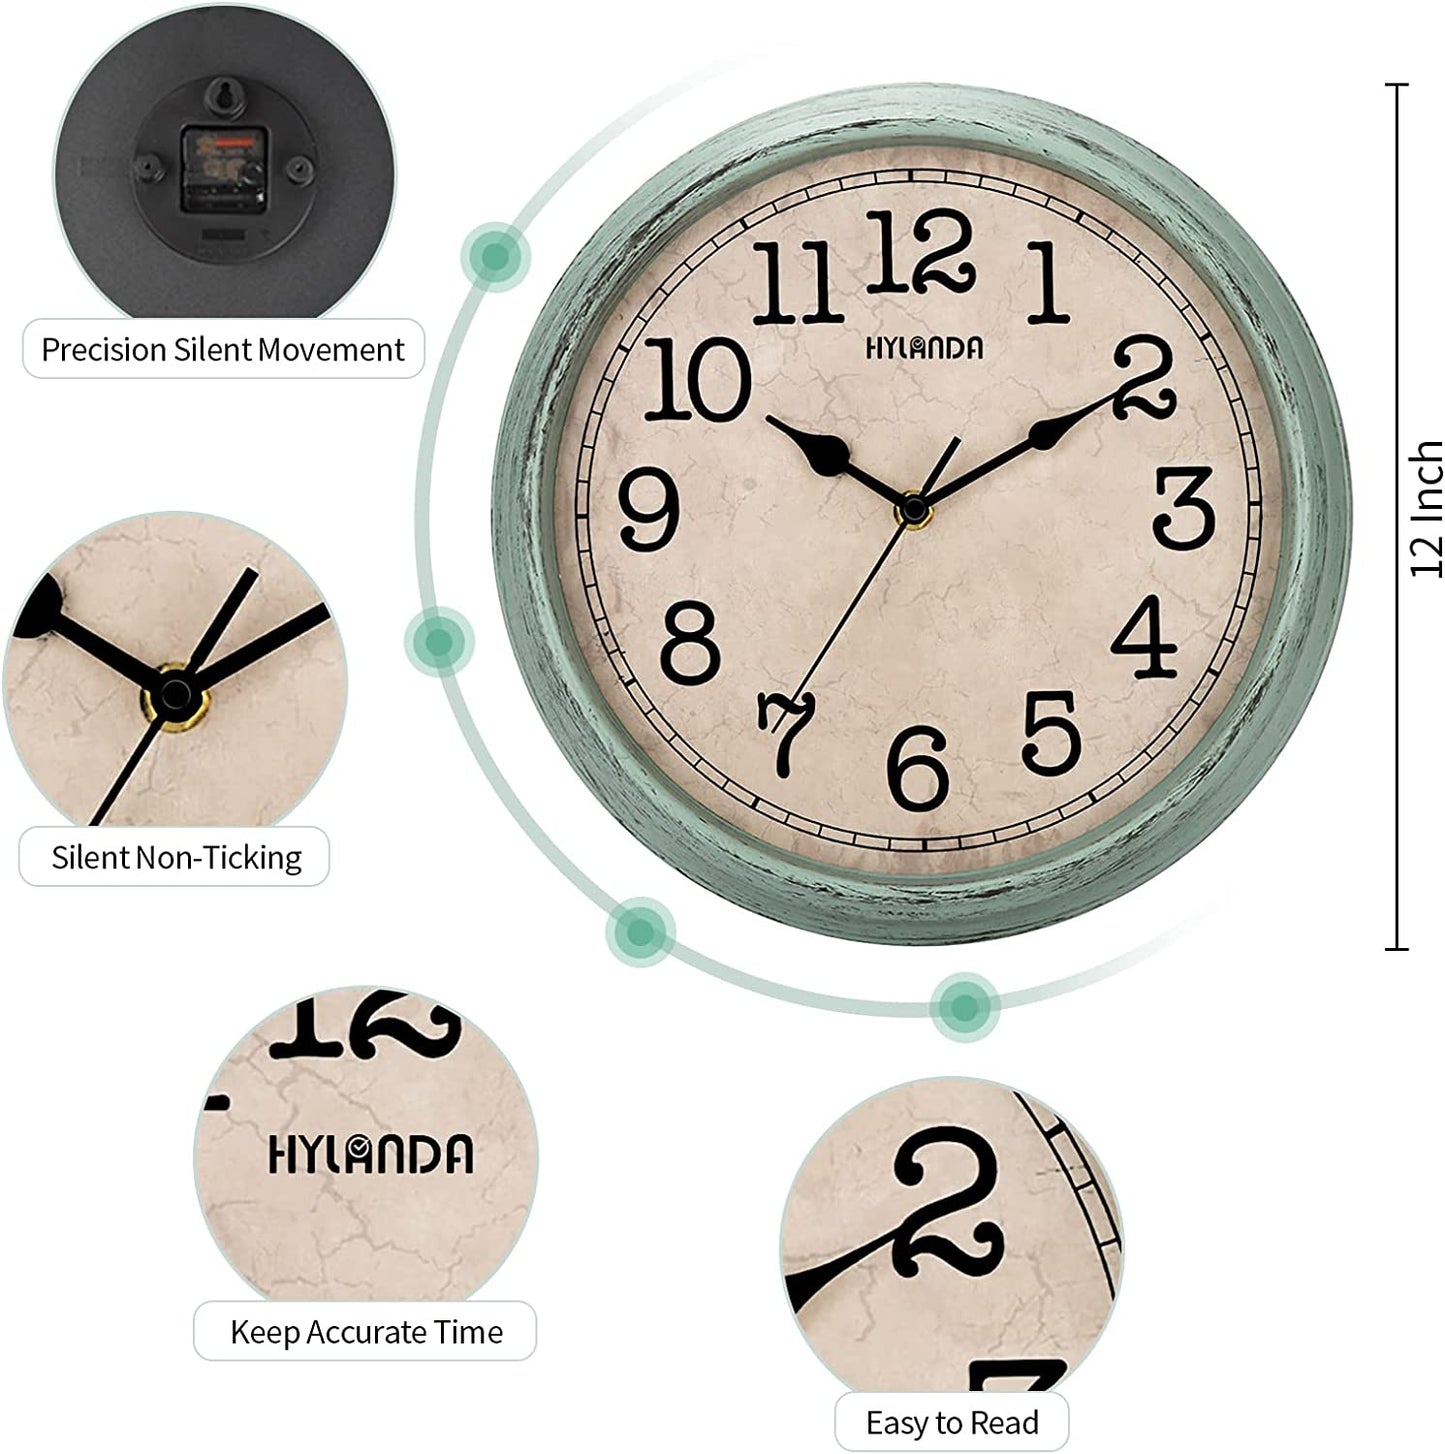 12 Inch Vintage/Retro Wall Clock, Silent Non-Ticking Decorative Wall Clocks Battery Operated with Large Numbers&Hd Glass Easy to Read for Kitchen/Living Room/Bathroom/Bedroom/Office